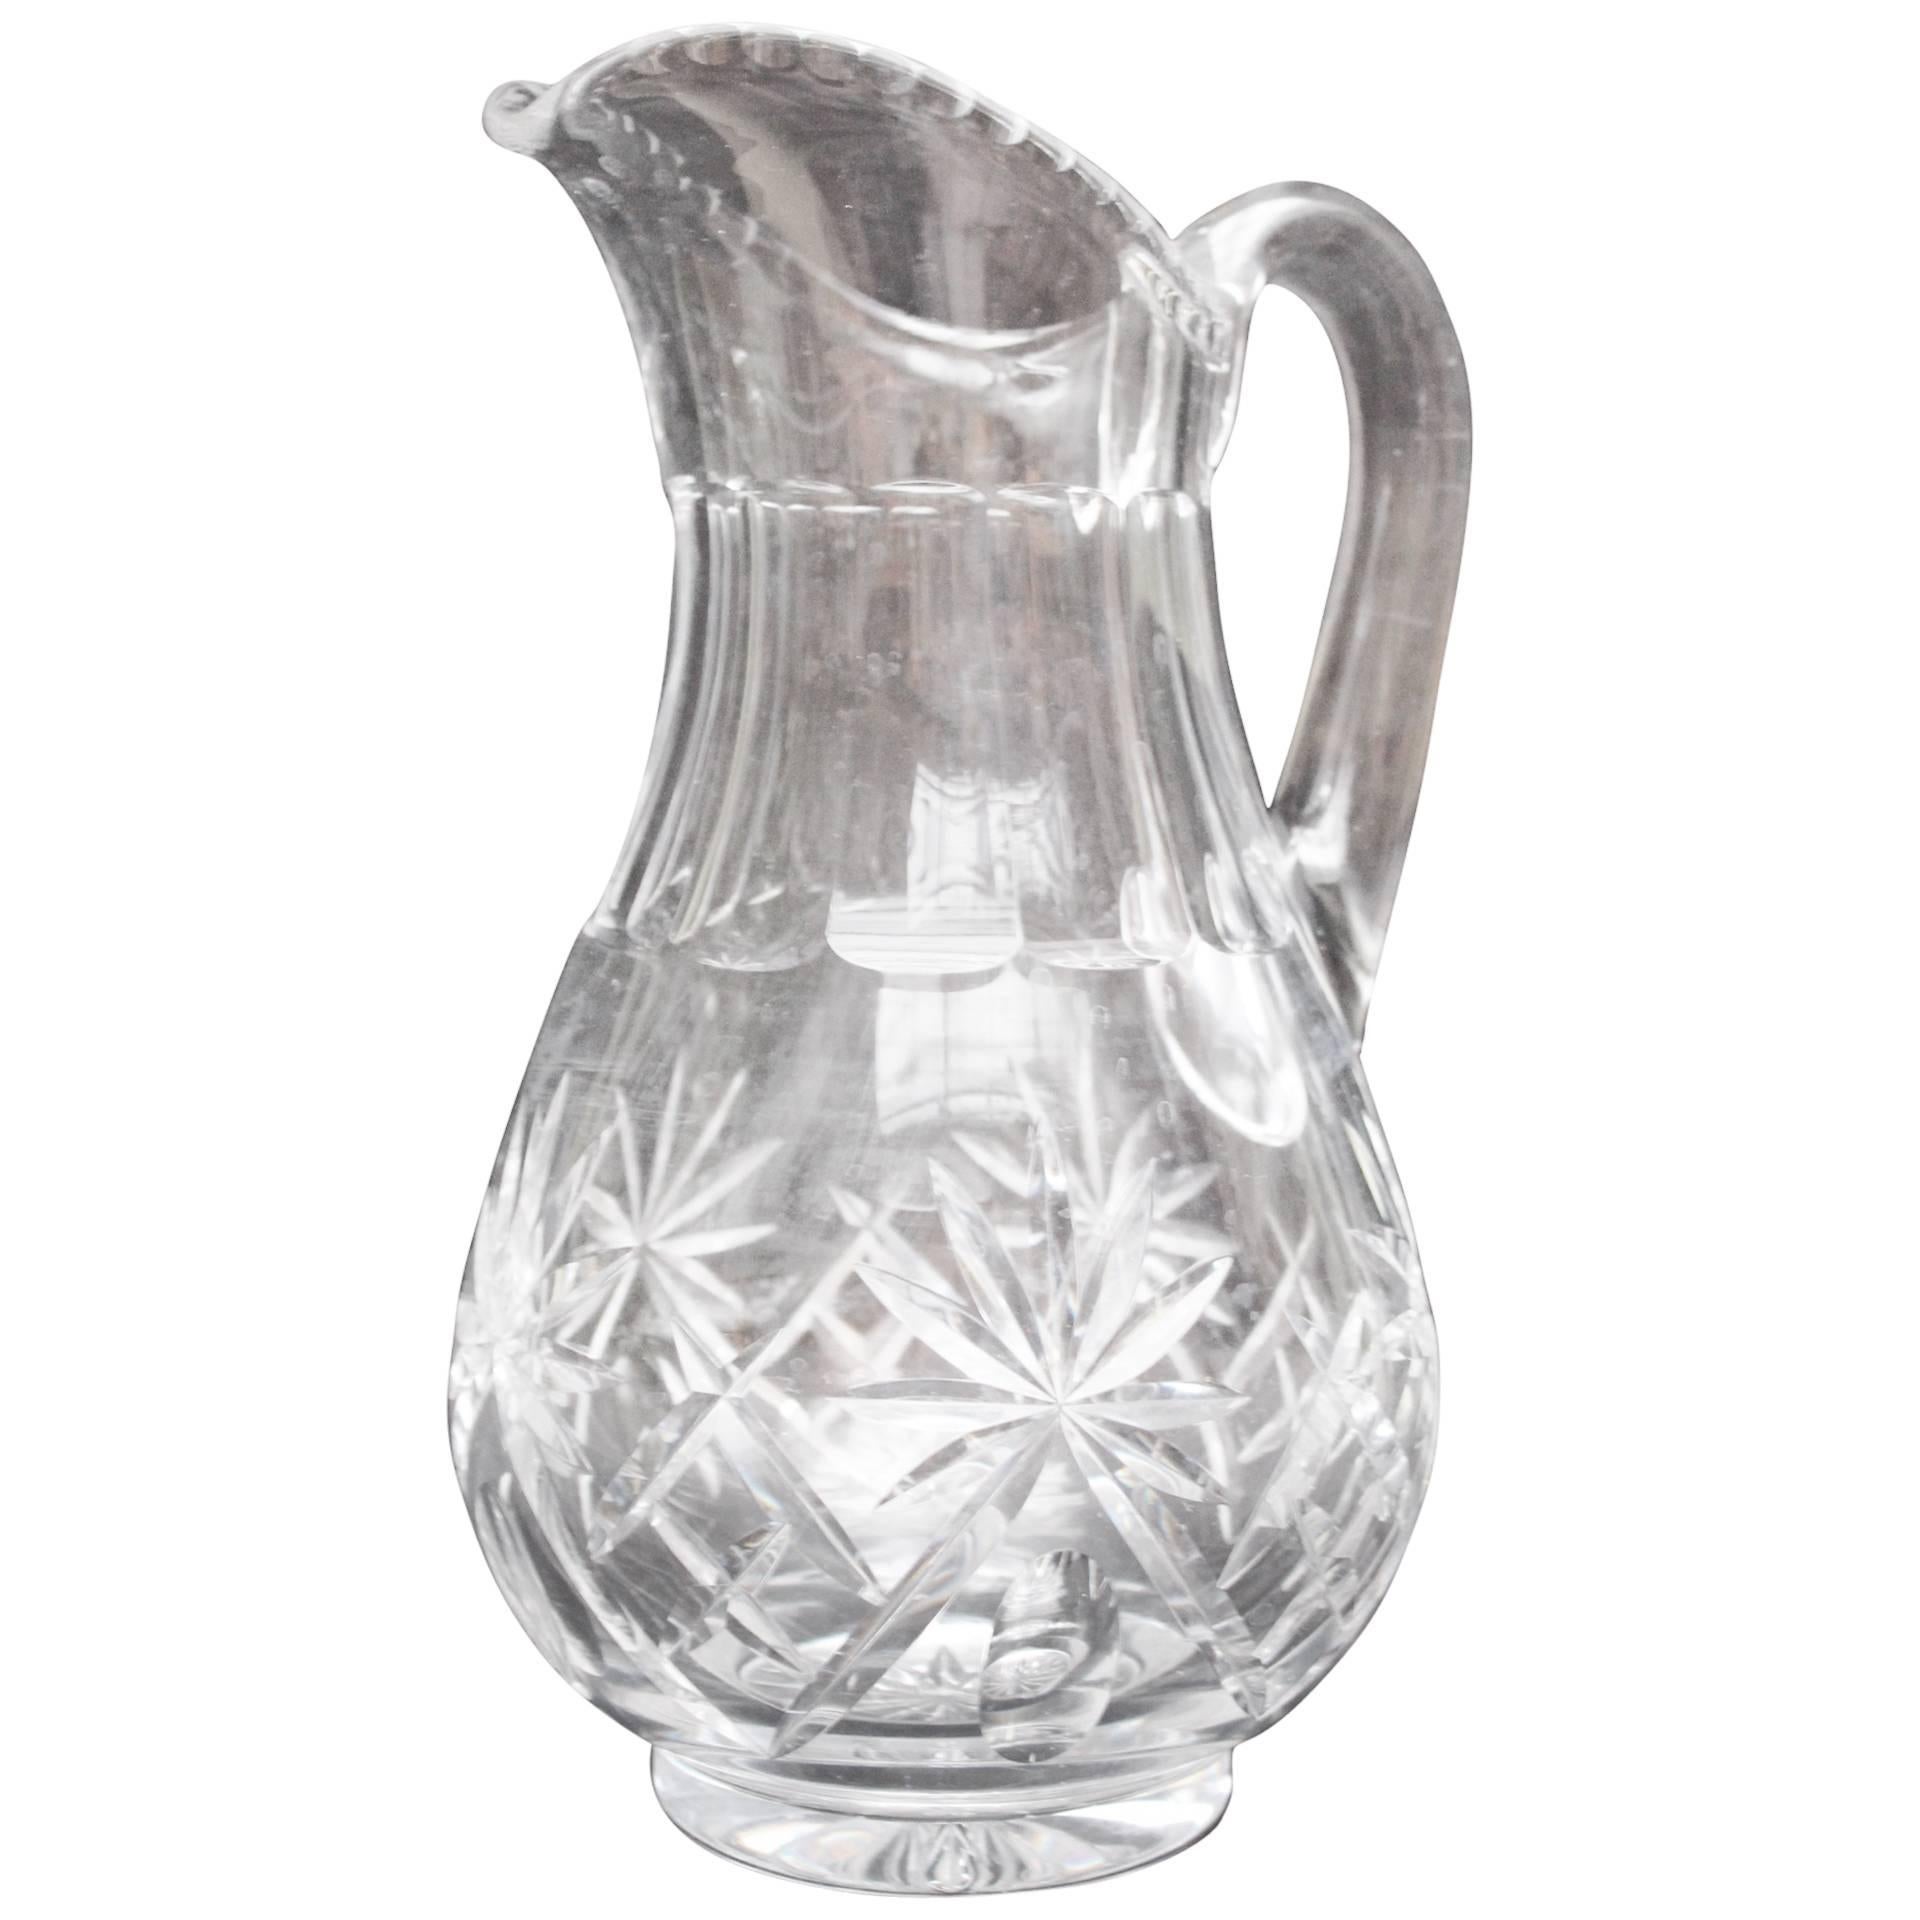 Water Pitcher, Baccarat Crystal, 19th Century, France